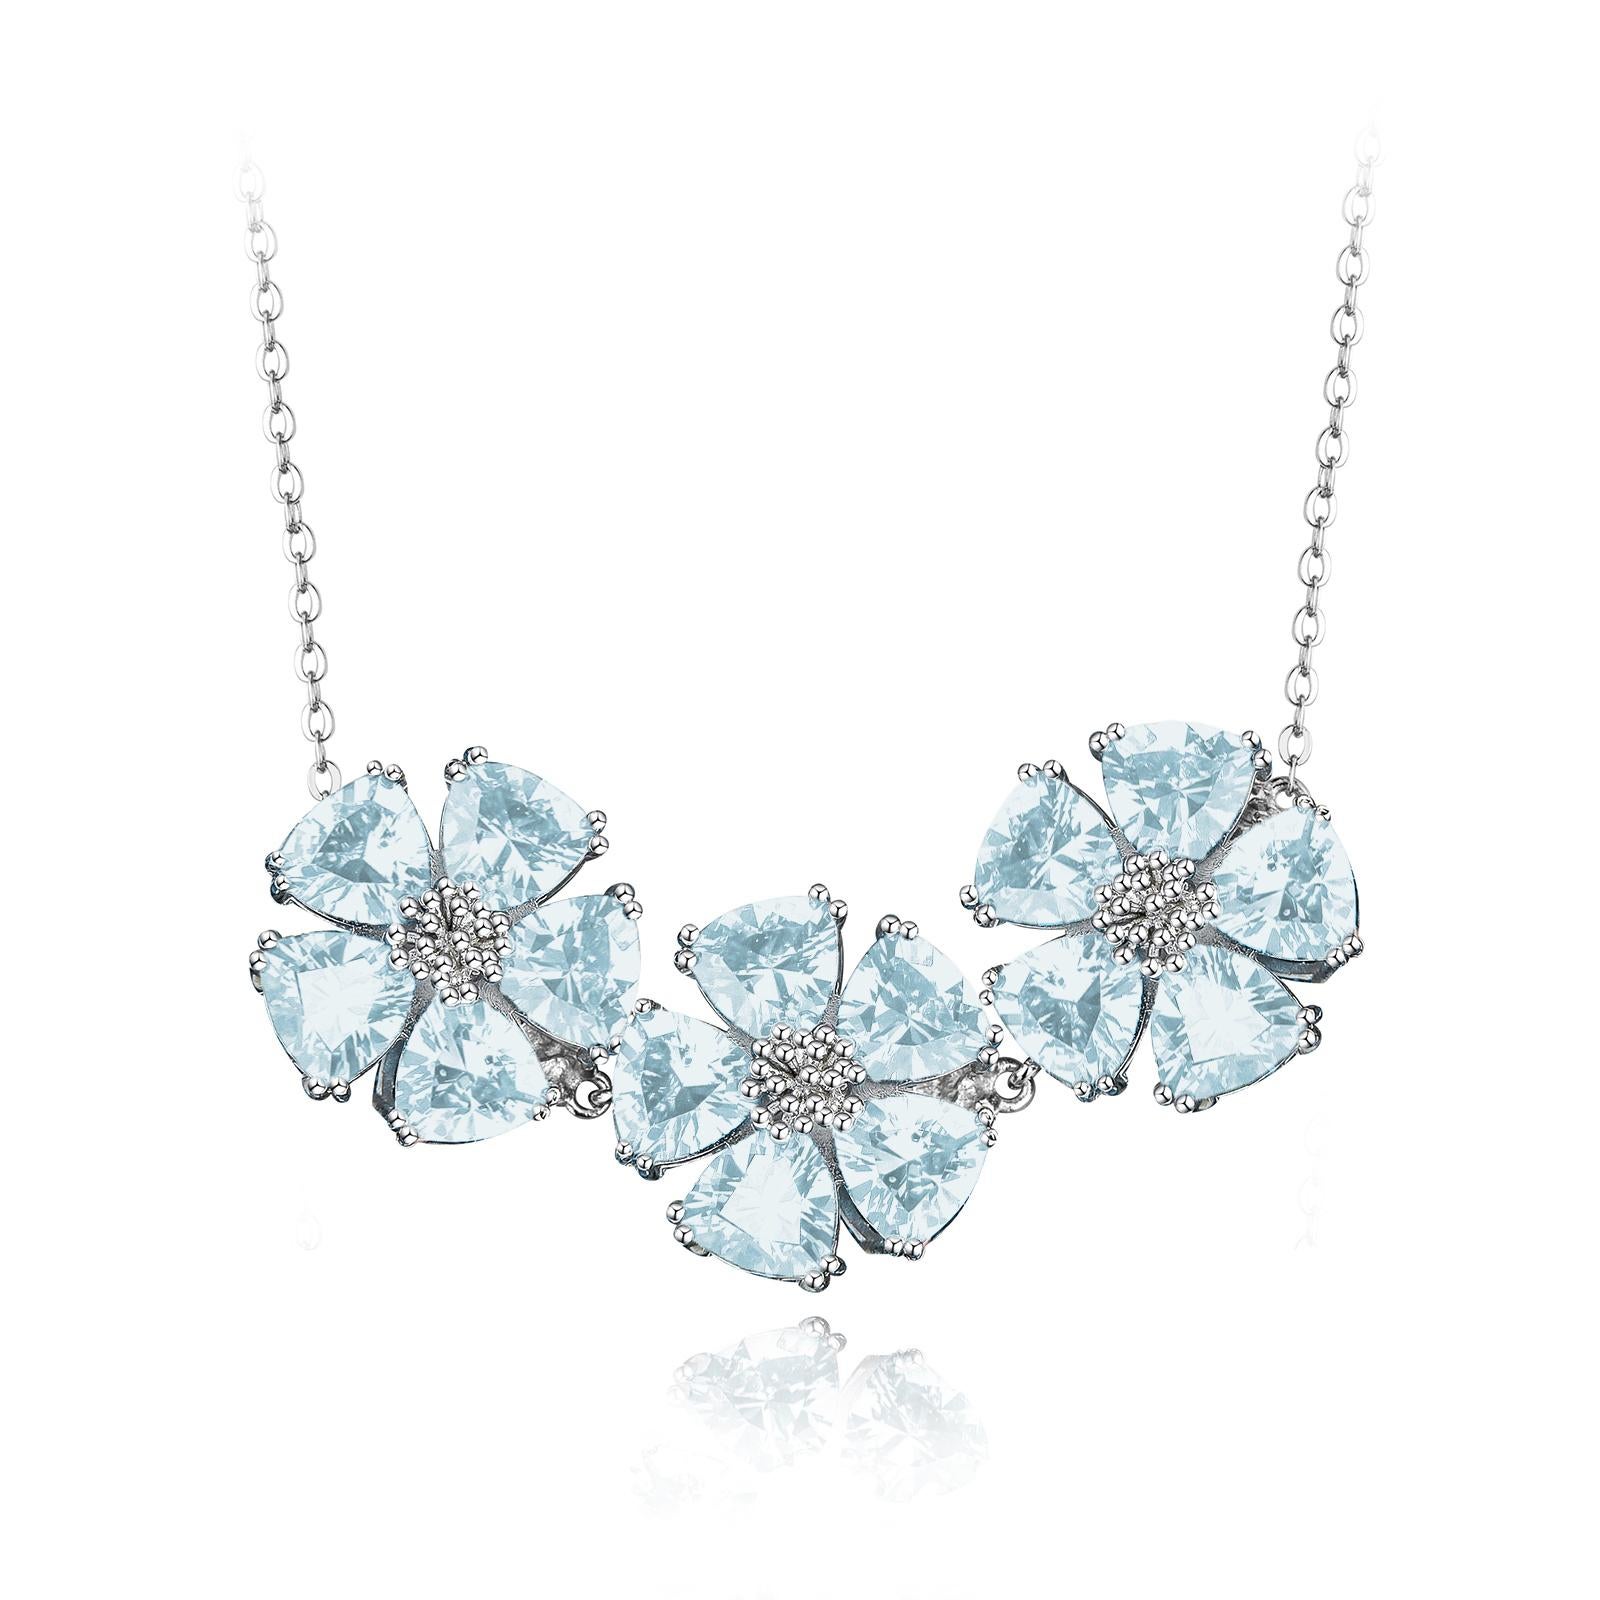 Designed in NYC

.925 Sterling Silver 3 x 10 mm Dark Blue Topaz Triple Blossom Gentile Necklace. No matter the season, allow natural beauty to surround you wherever you go. Triple blossom gentile necklace: 

Sterling silver chain necklace adjustable